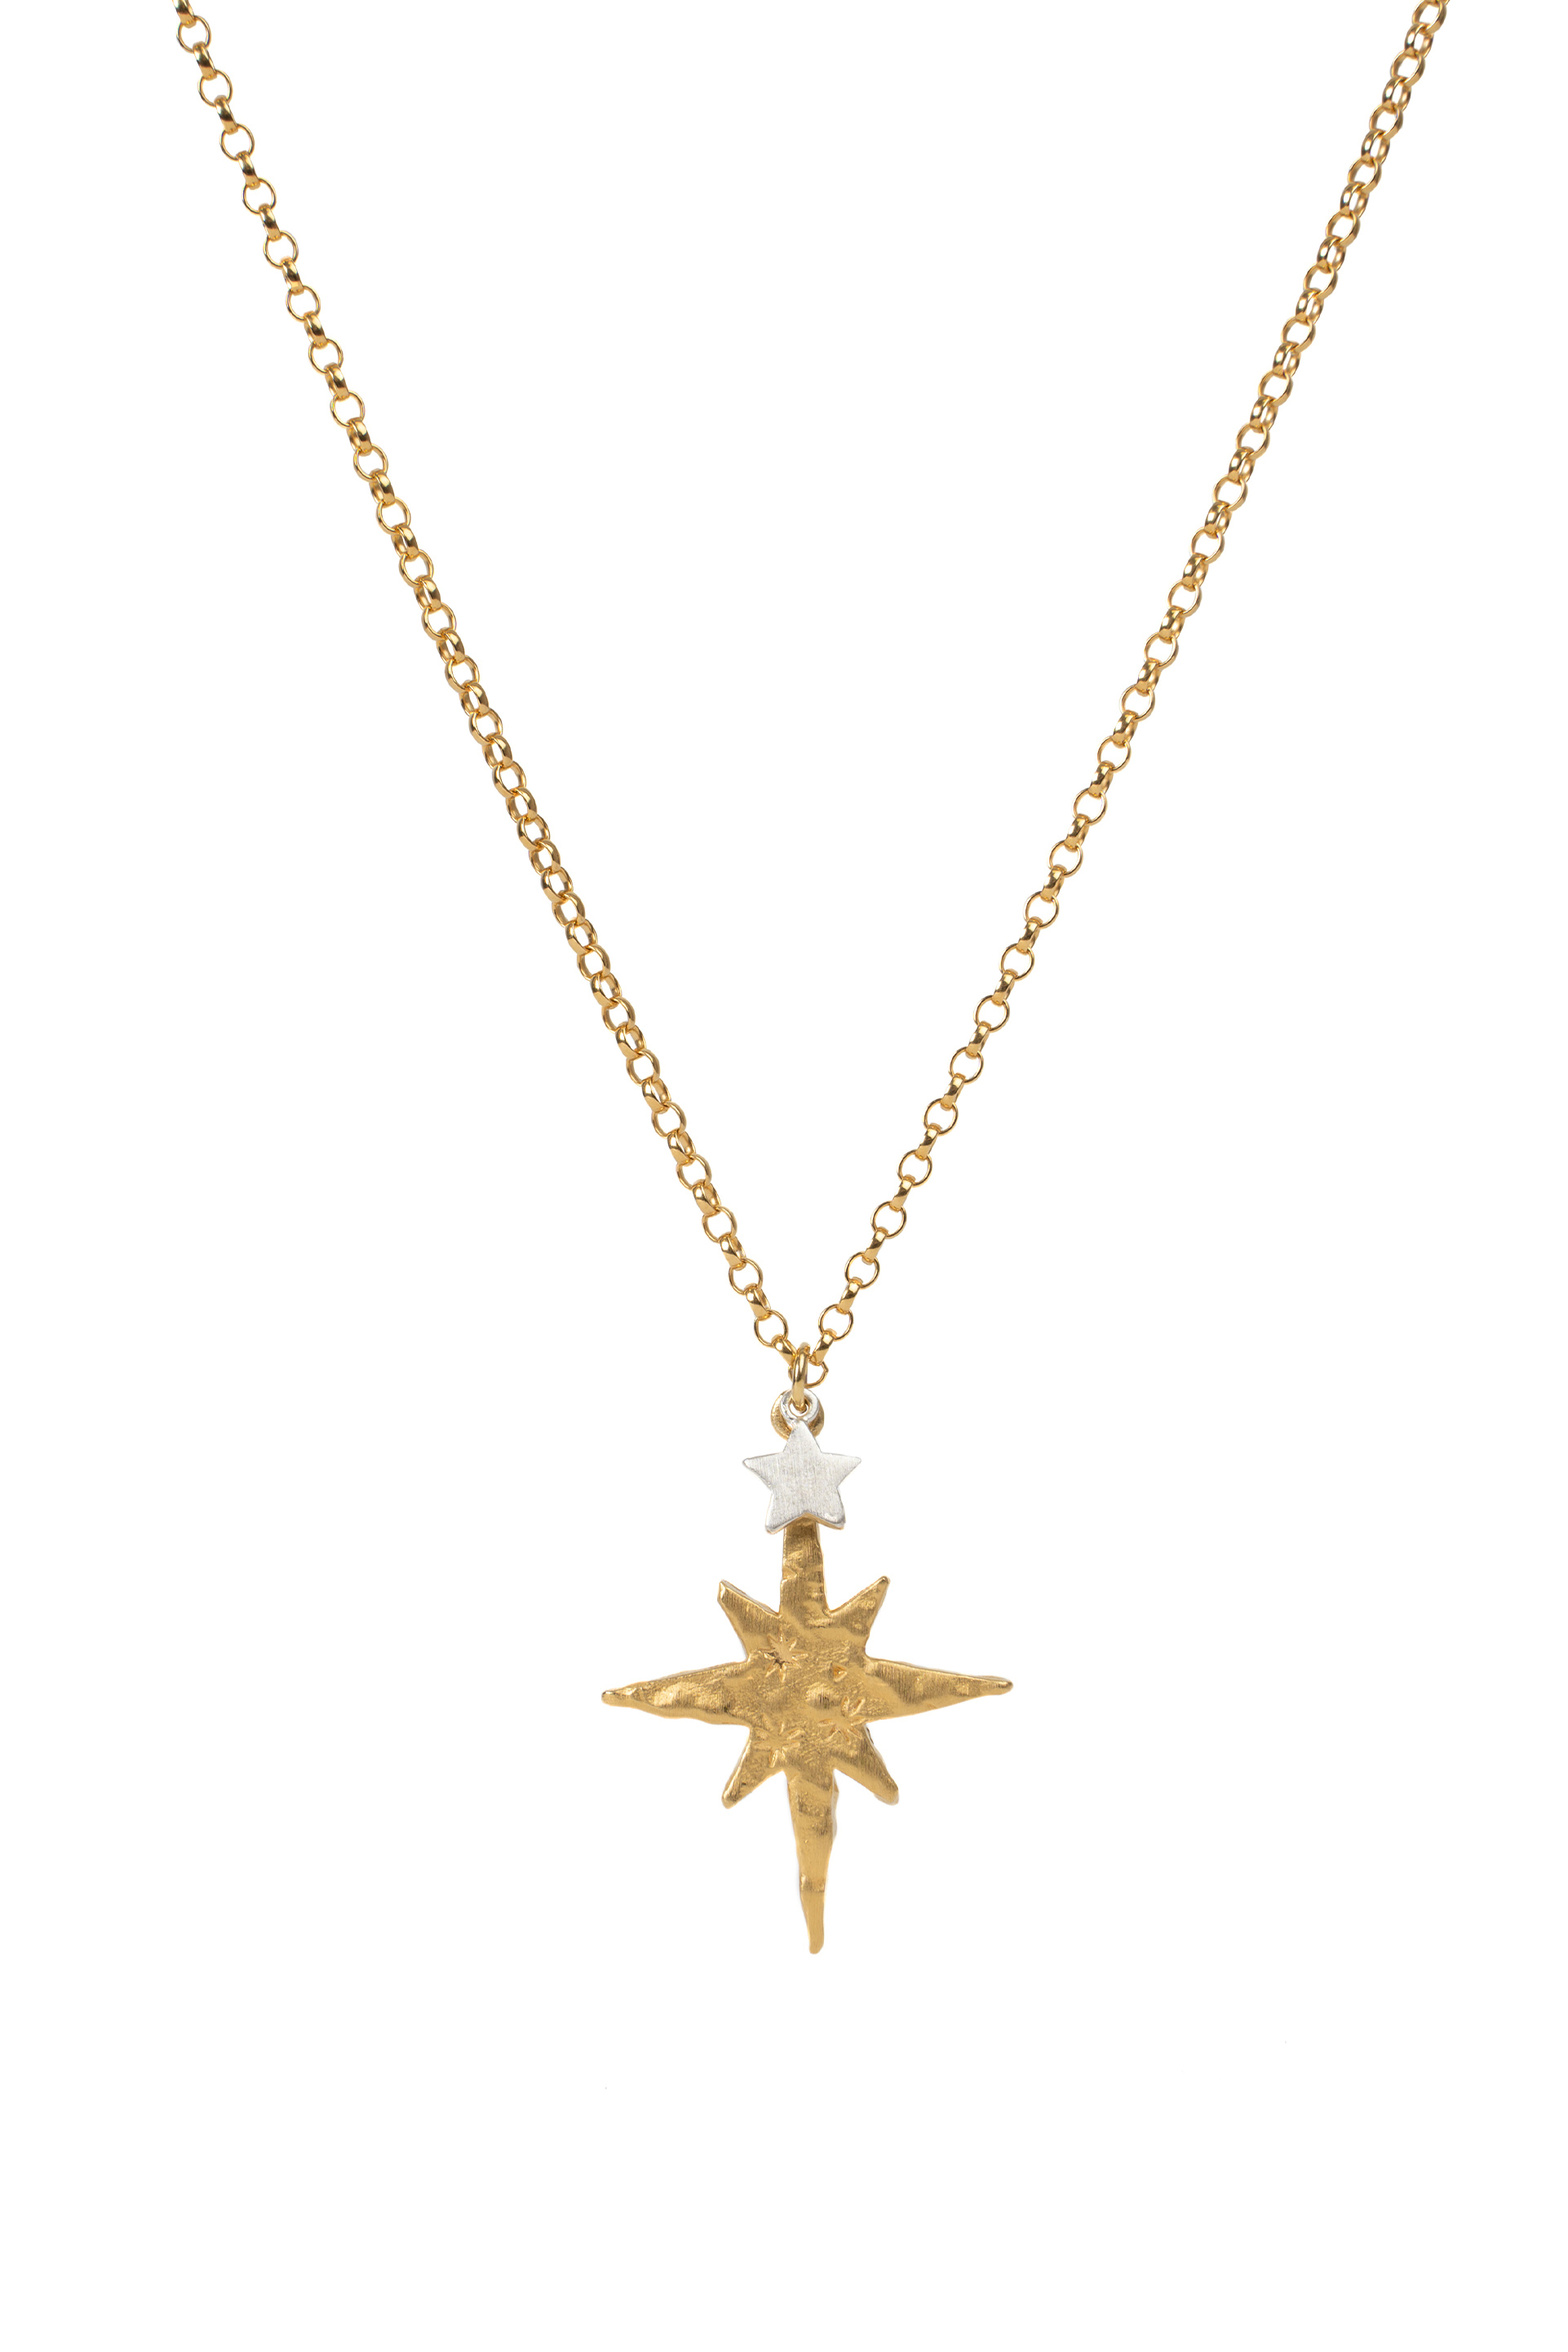 cb540_north-star-necklace_gold_a.jpg